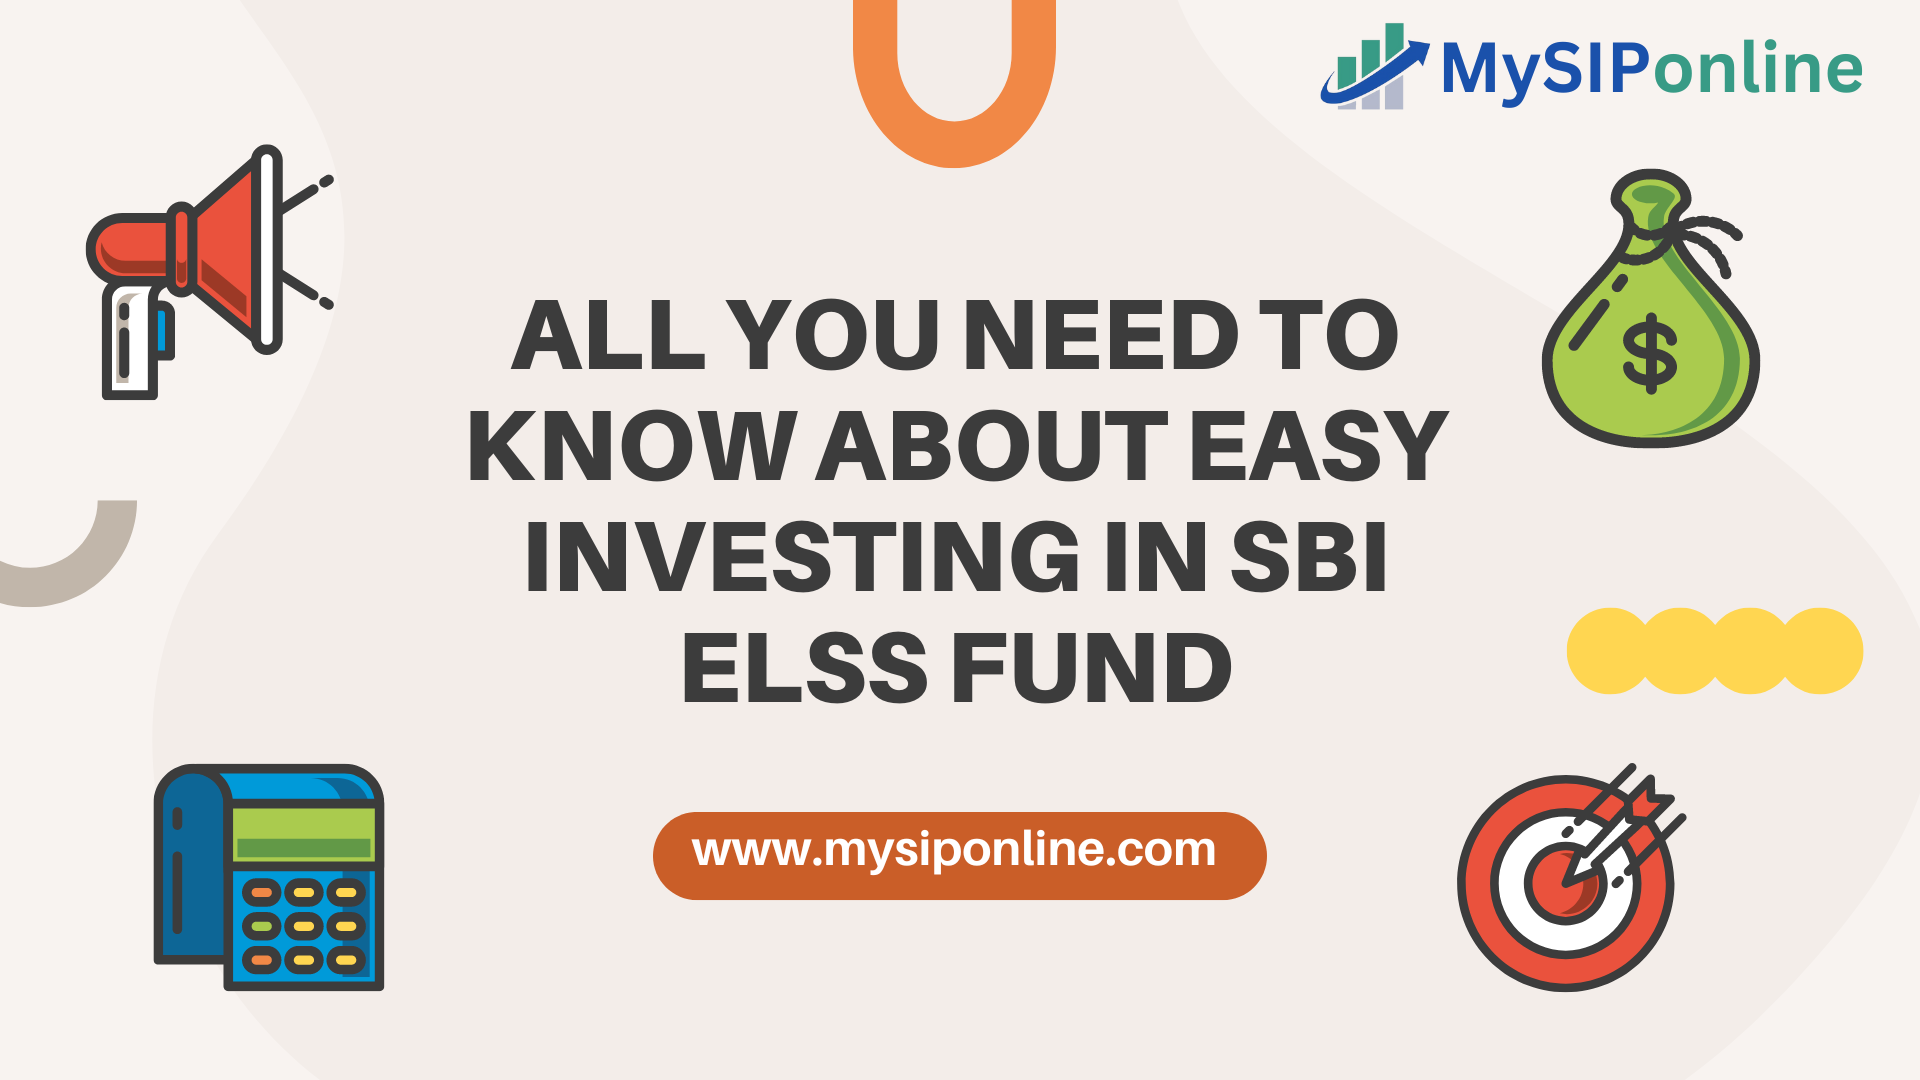 All You Need to Know About Easy Investing in SBI ELSS Fund